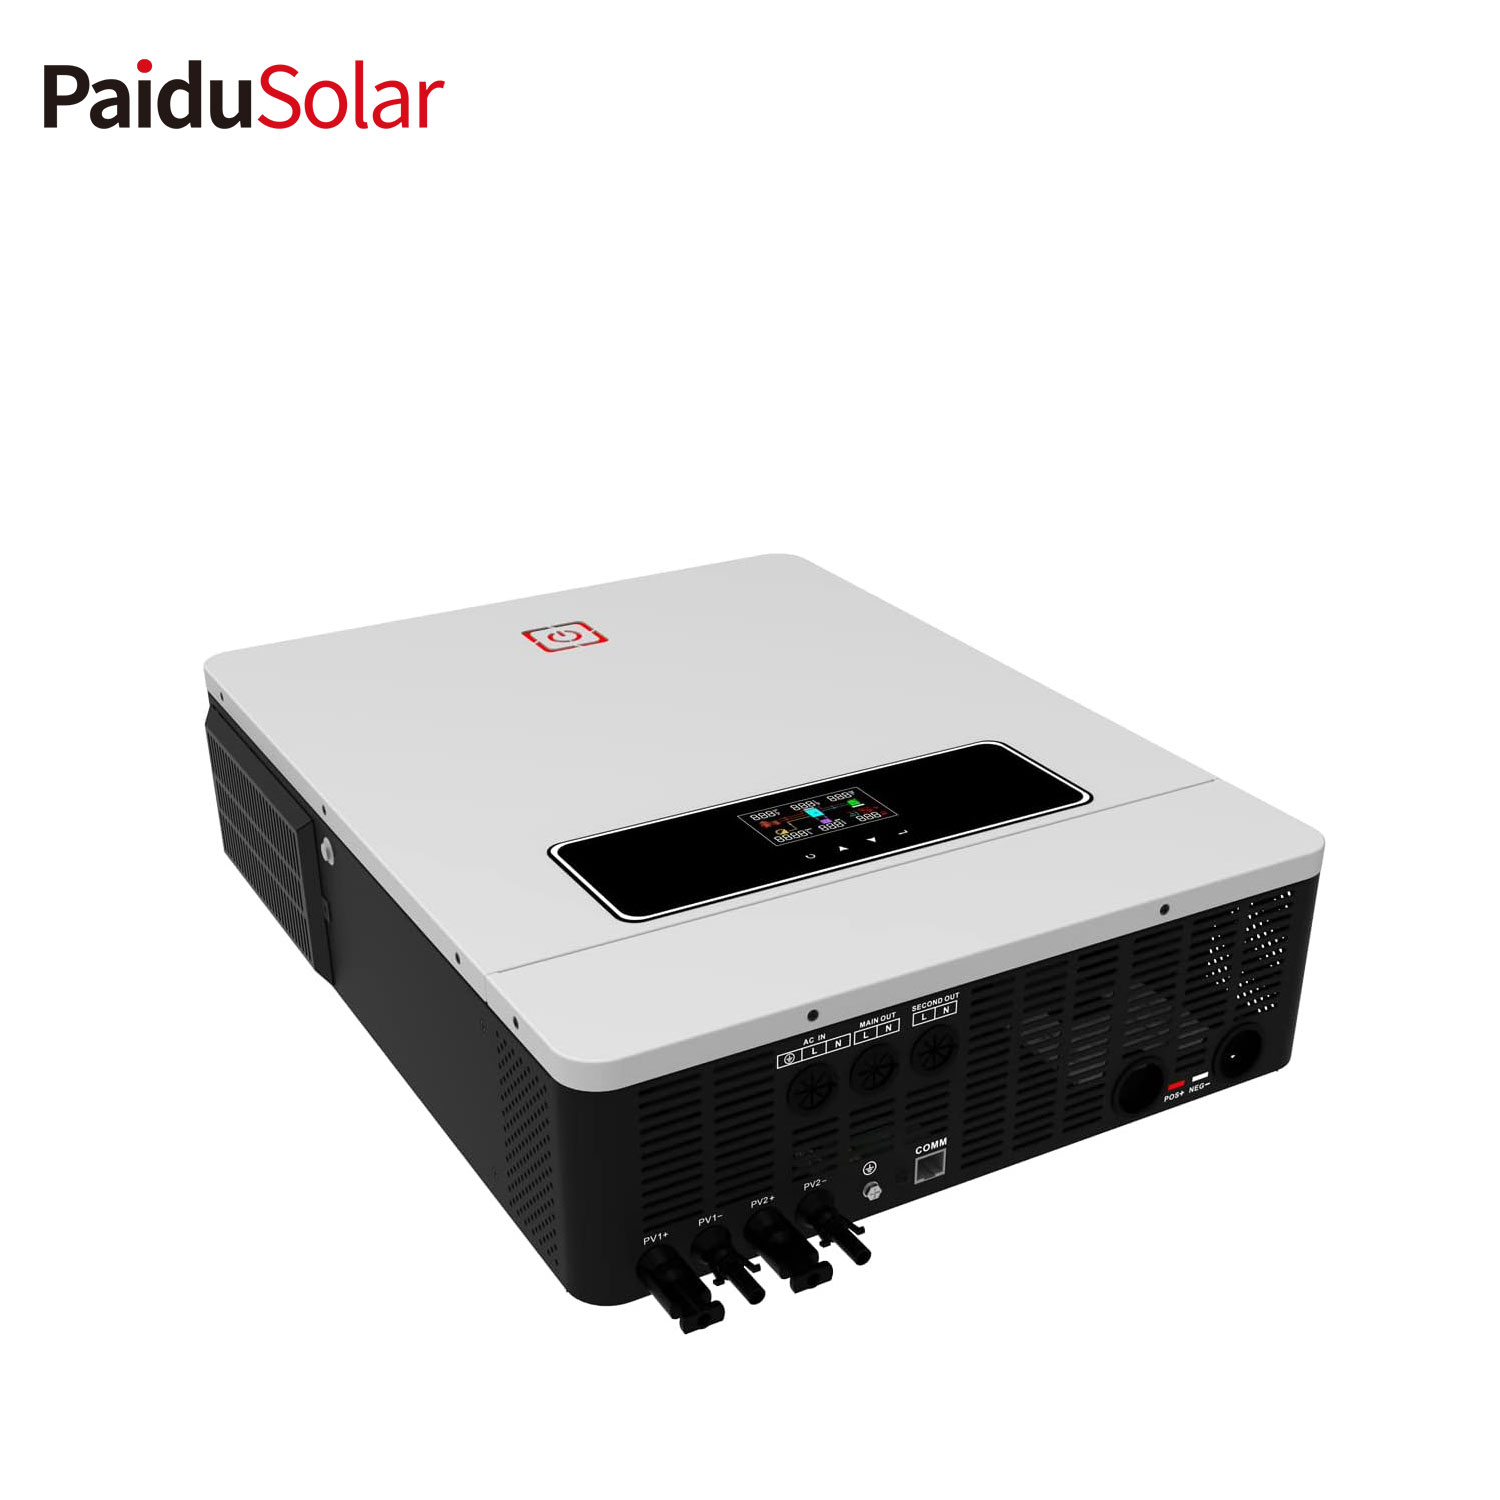 PaiduSolar 8.2KW Solar Hybrid Inverter Built-in Charge Controller And Pure Sine Wave Inverter For...